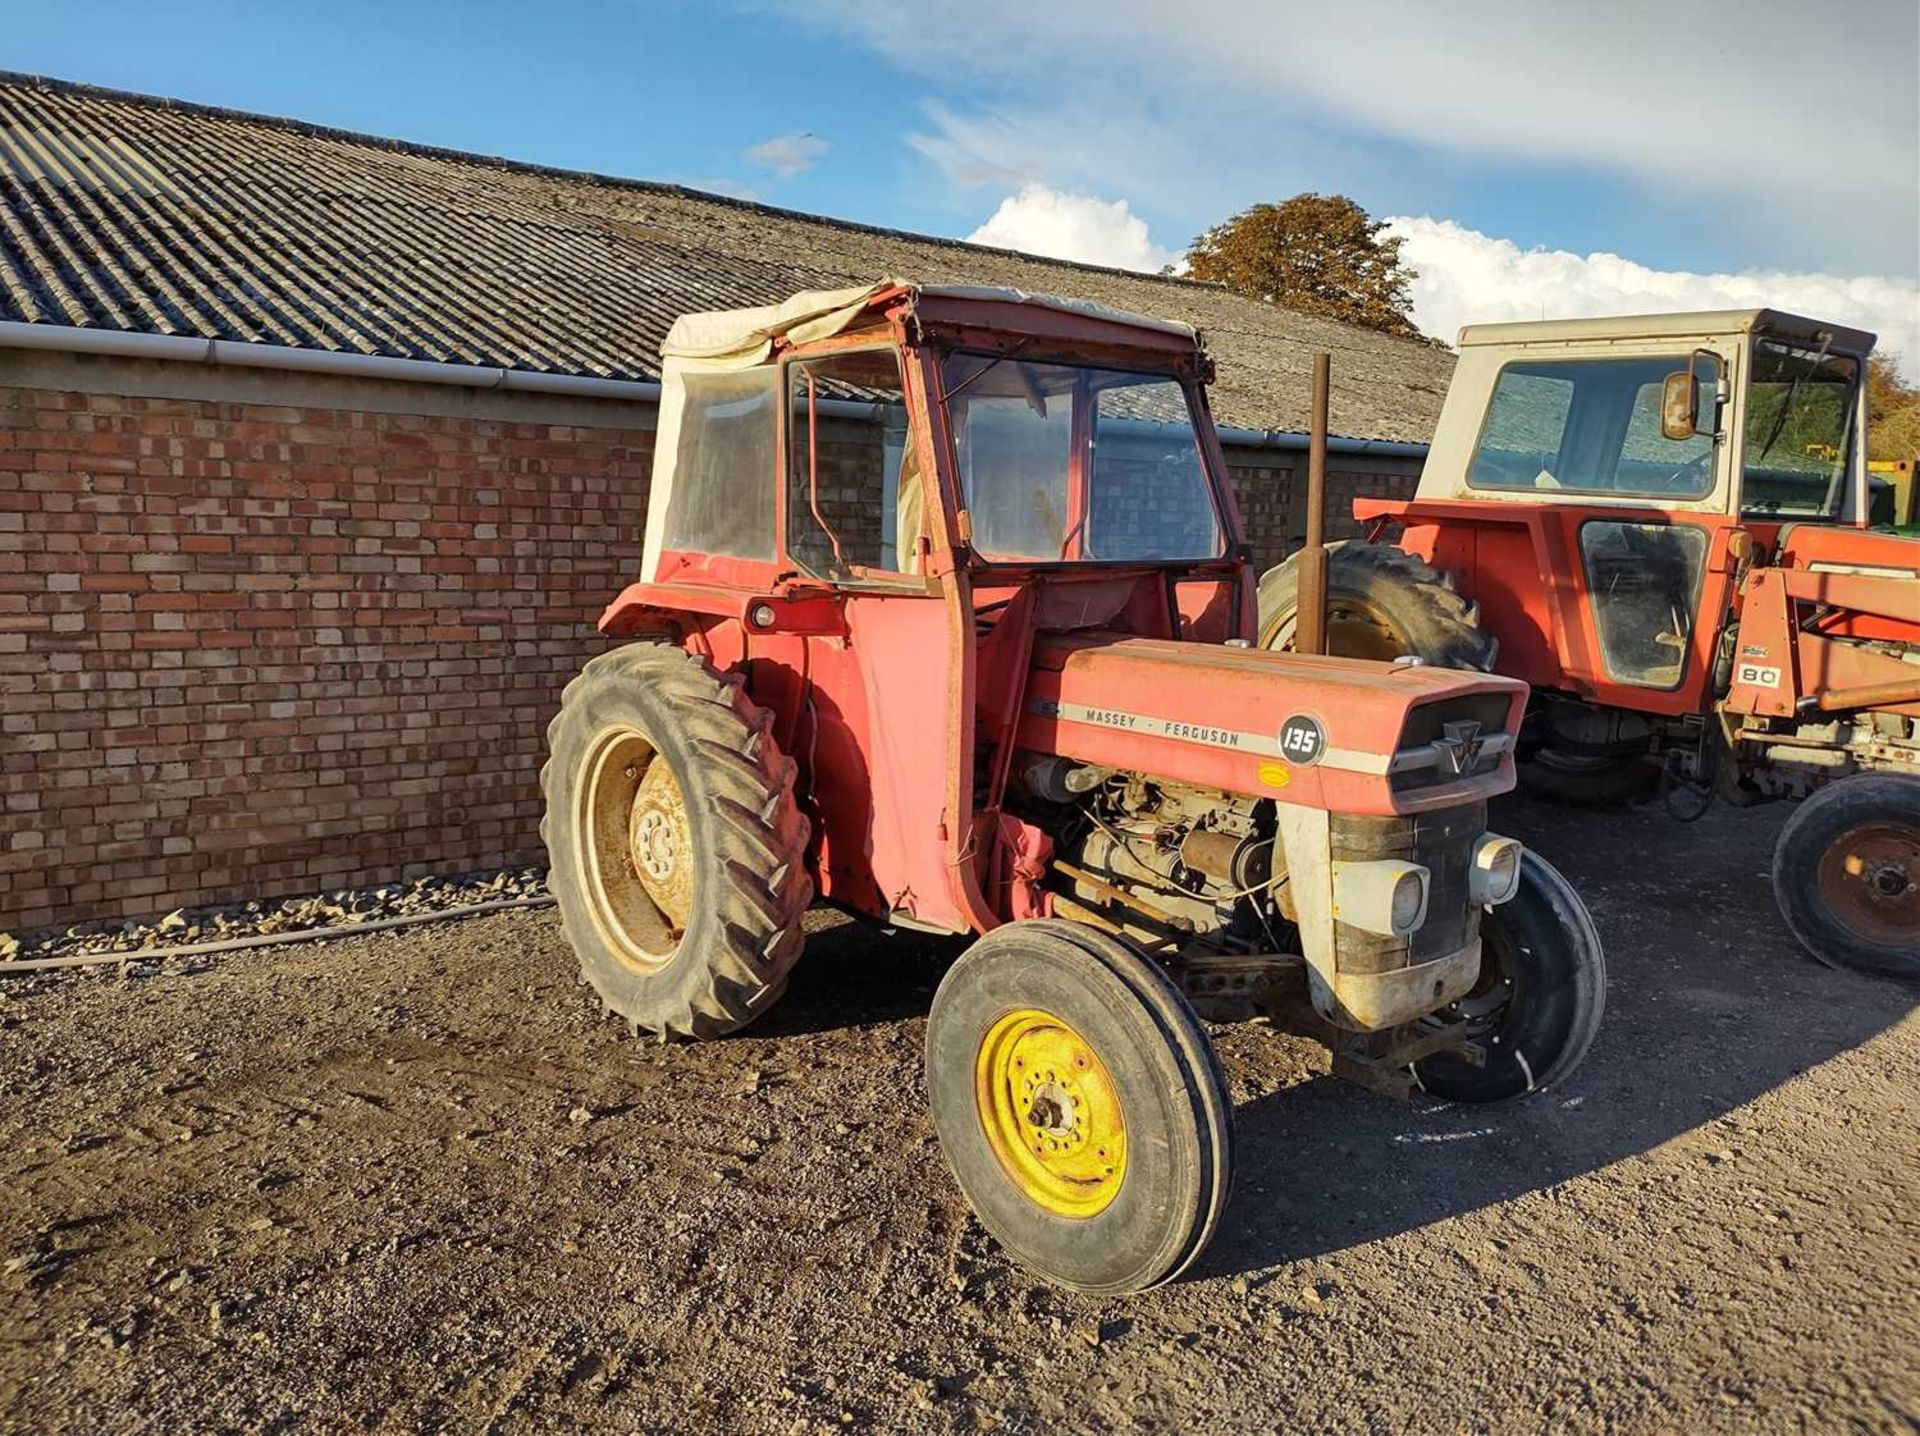 Massey Ferguson 135 Tractor with Original Front Wheels. Pickup Hitch. 2,284 Hrs. Reg: 7JE 705X - Image 2 of 10